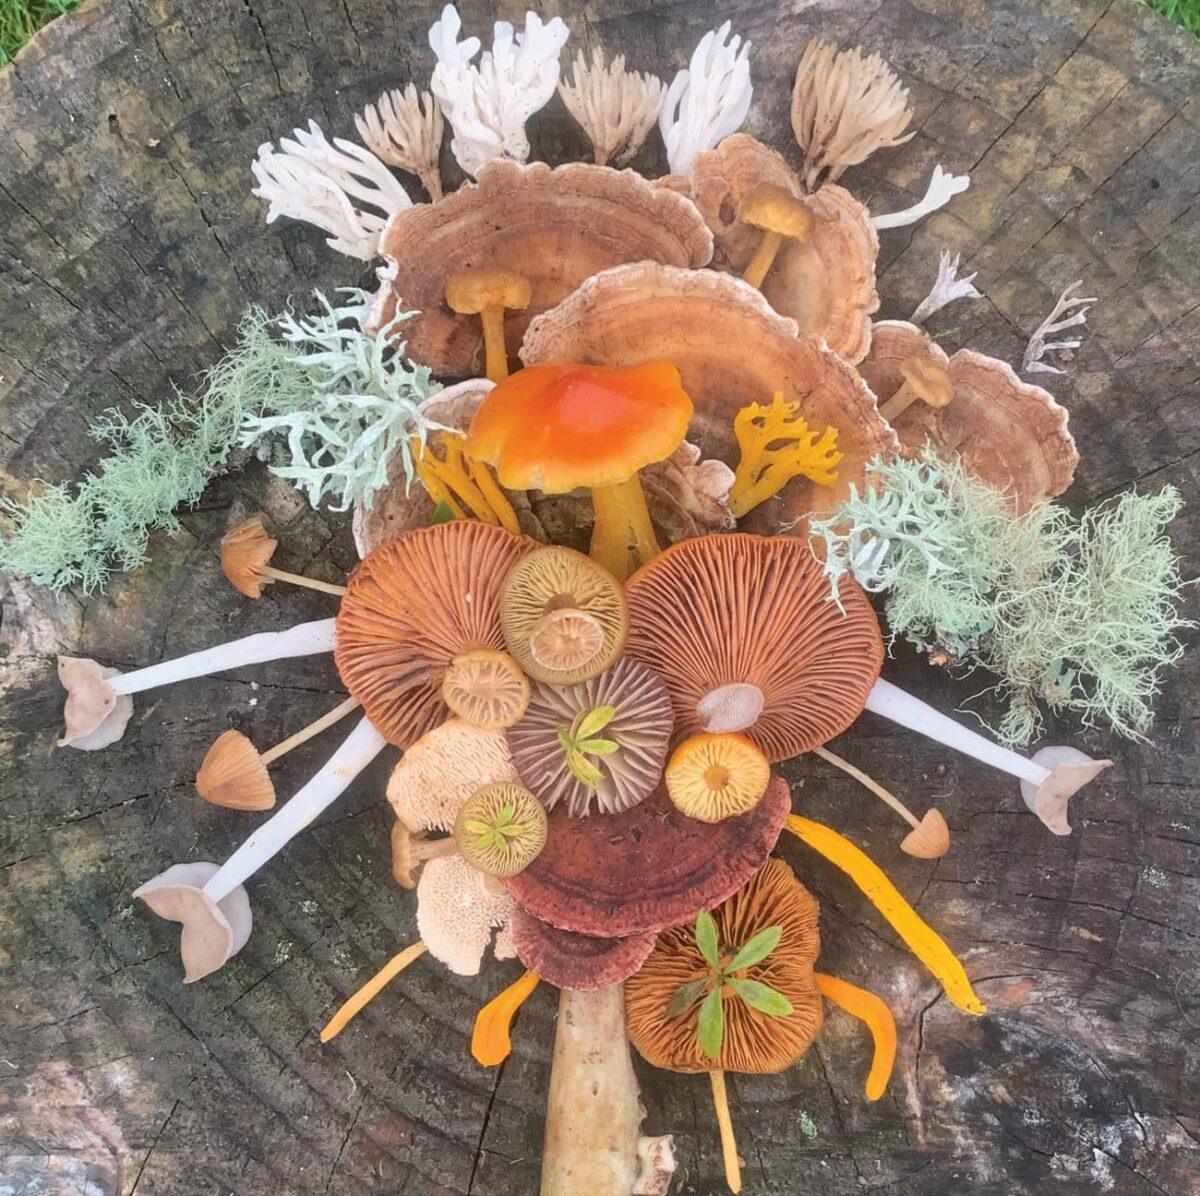 Colorful Arrangements Made Of Mushrooms By Jill Bliss 3